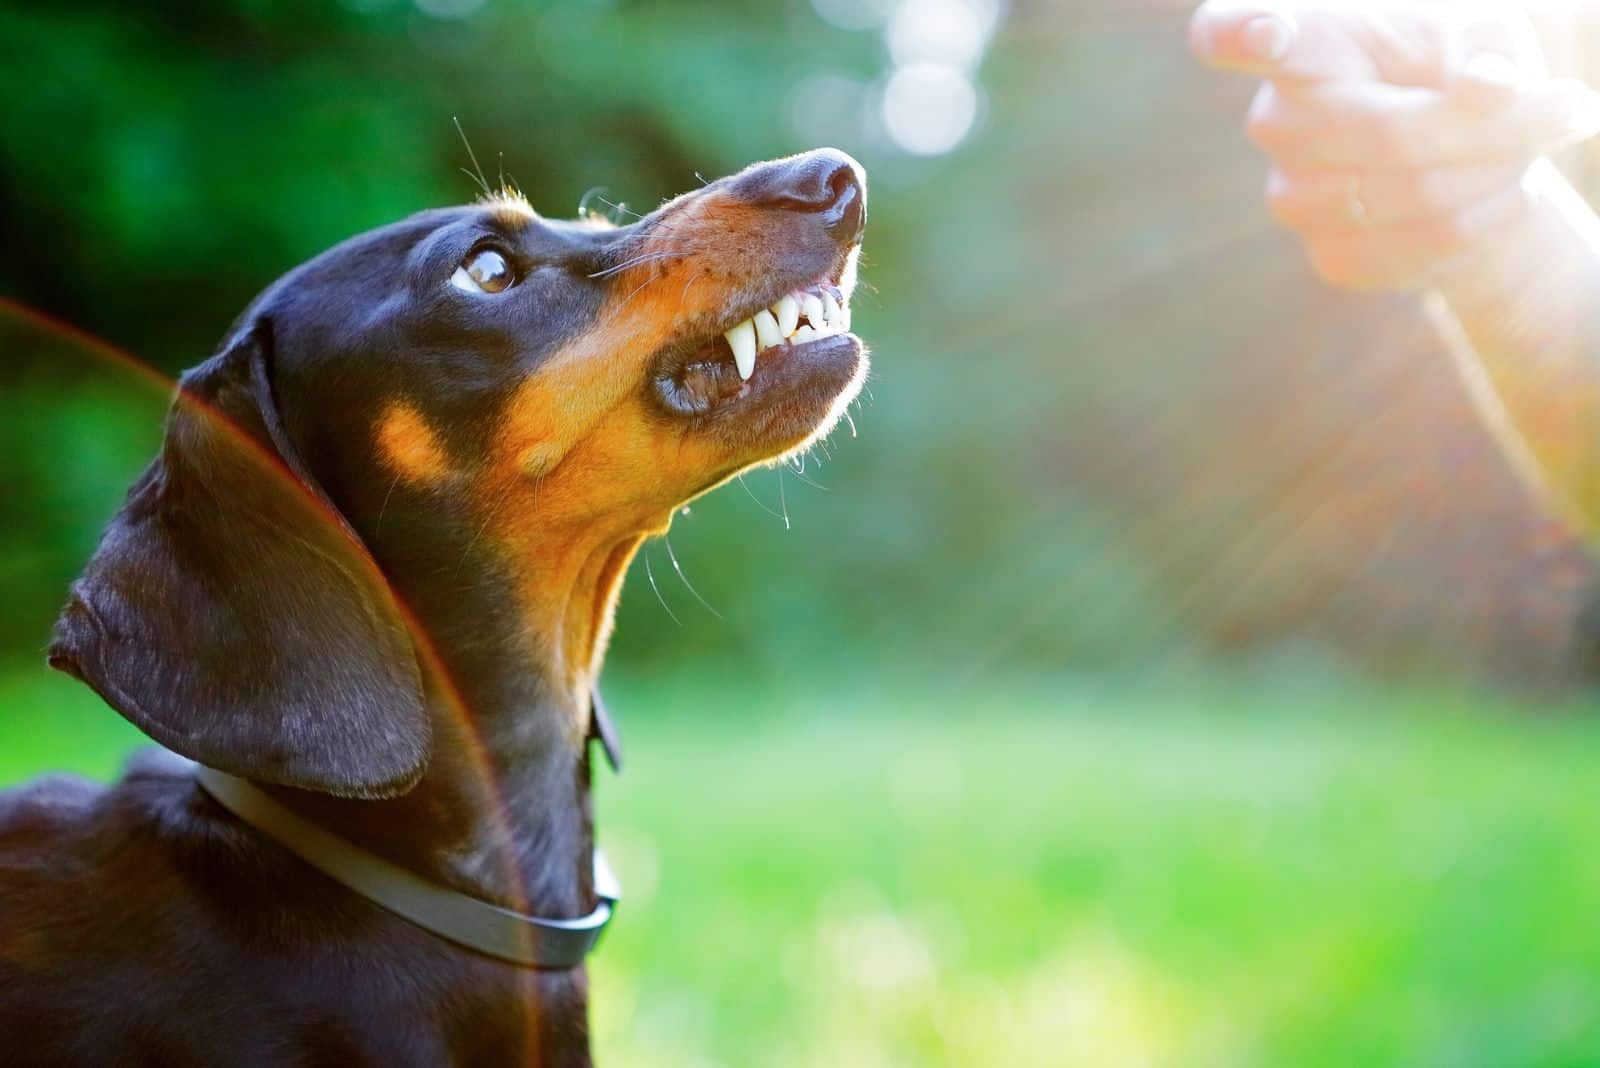 aggressive black dachshund showing teeth infront of a woman's hand in bright rays sun